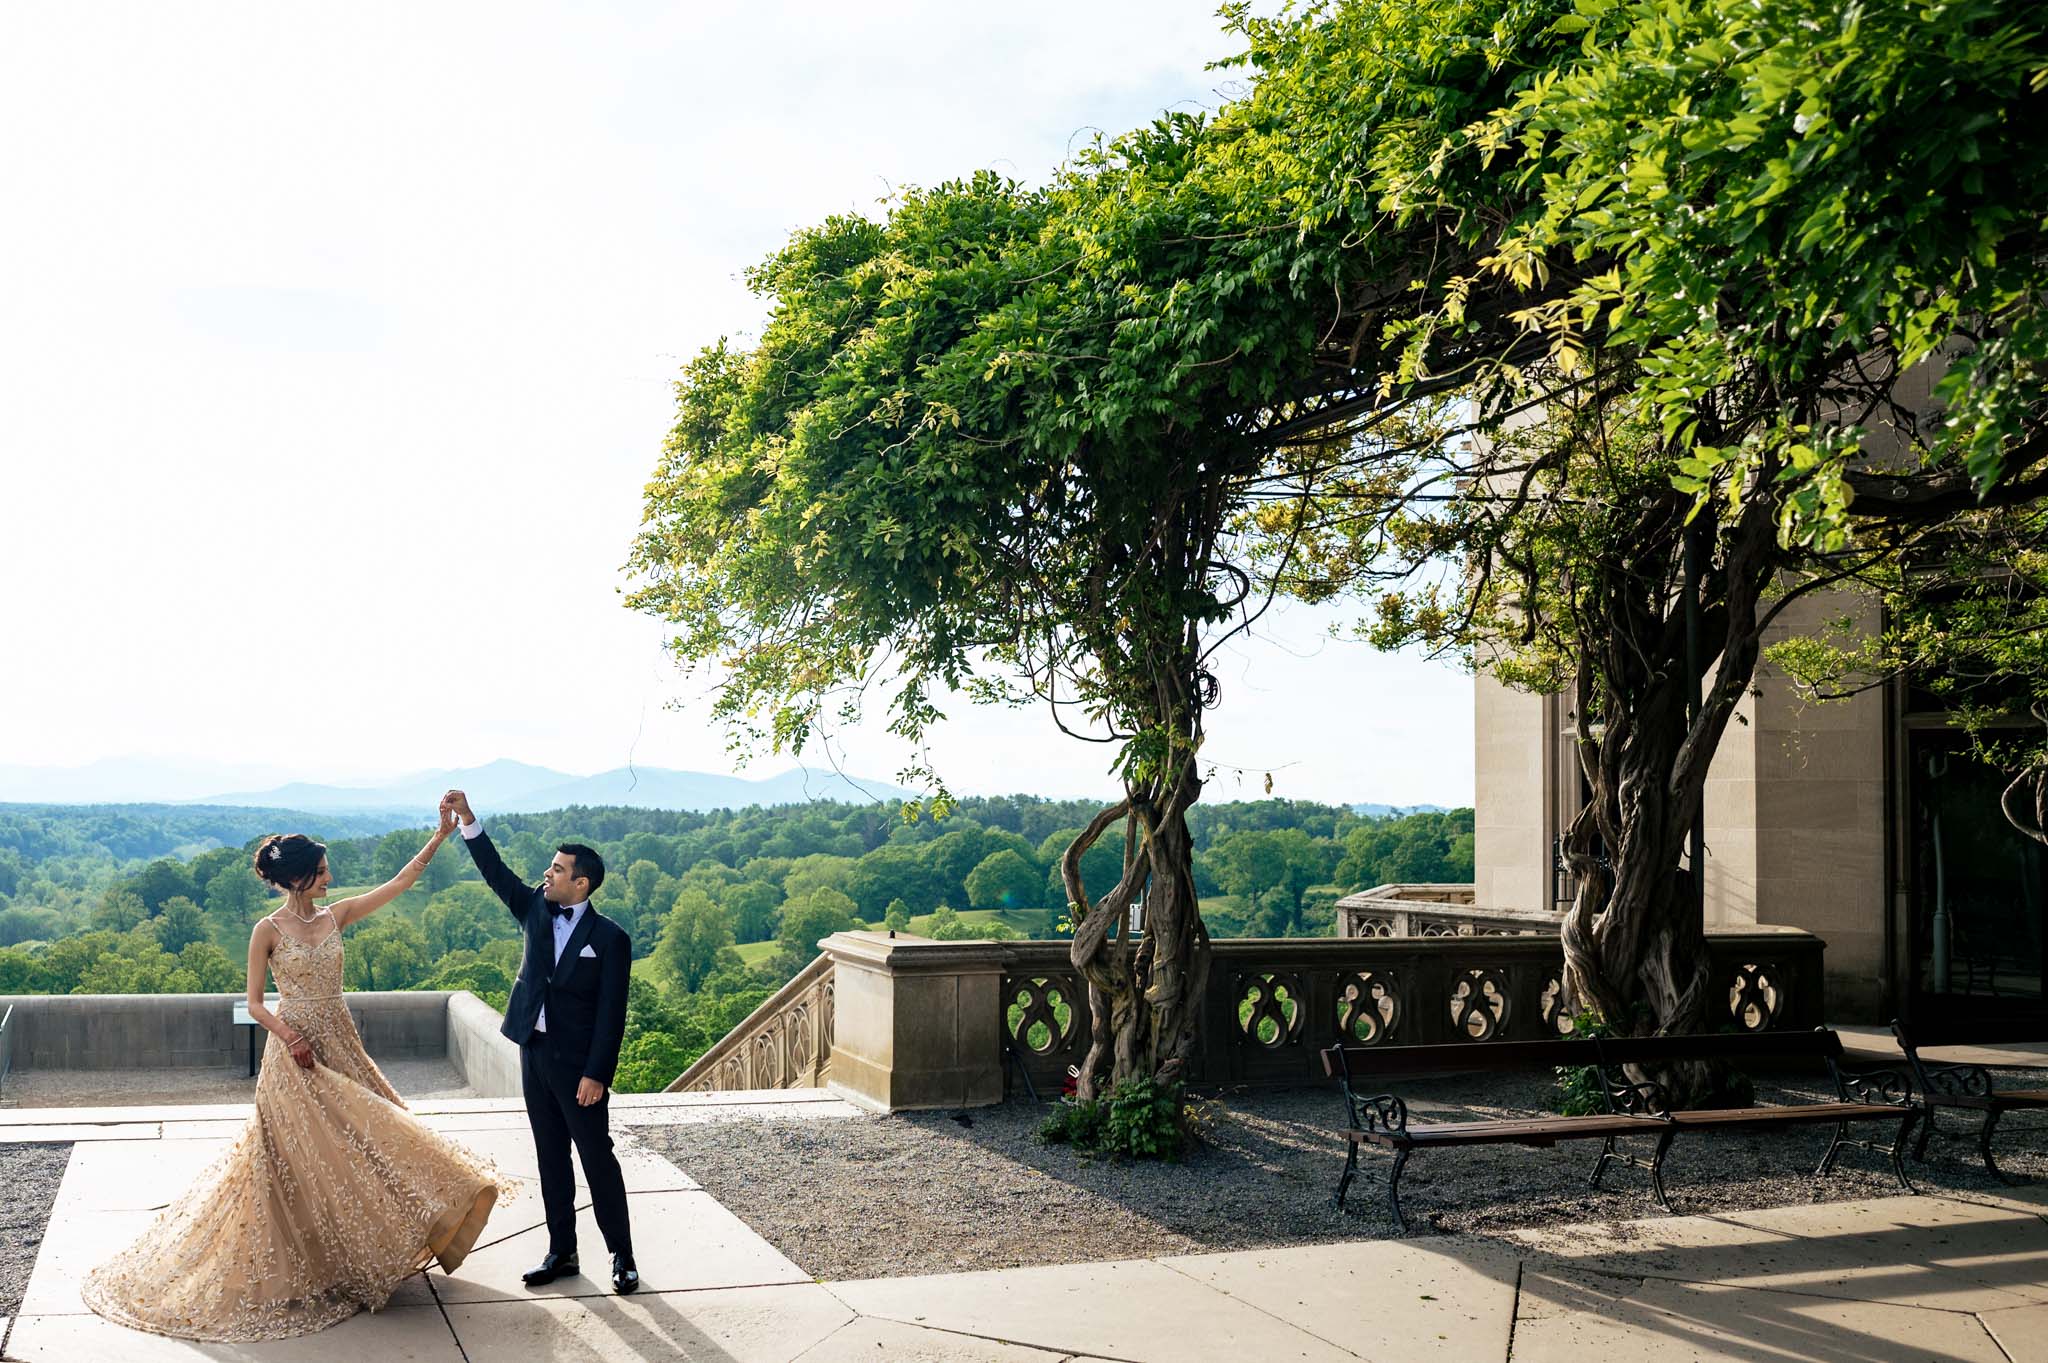 A bride and groom having a Biltmore Estate wedding in front of a building with a view.